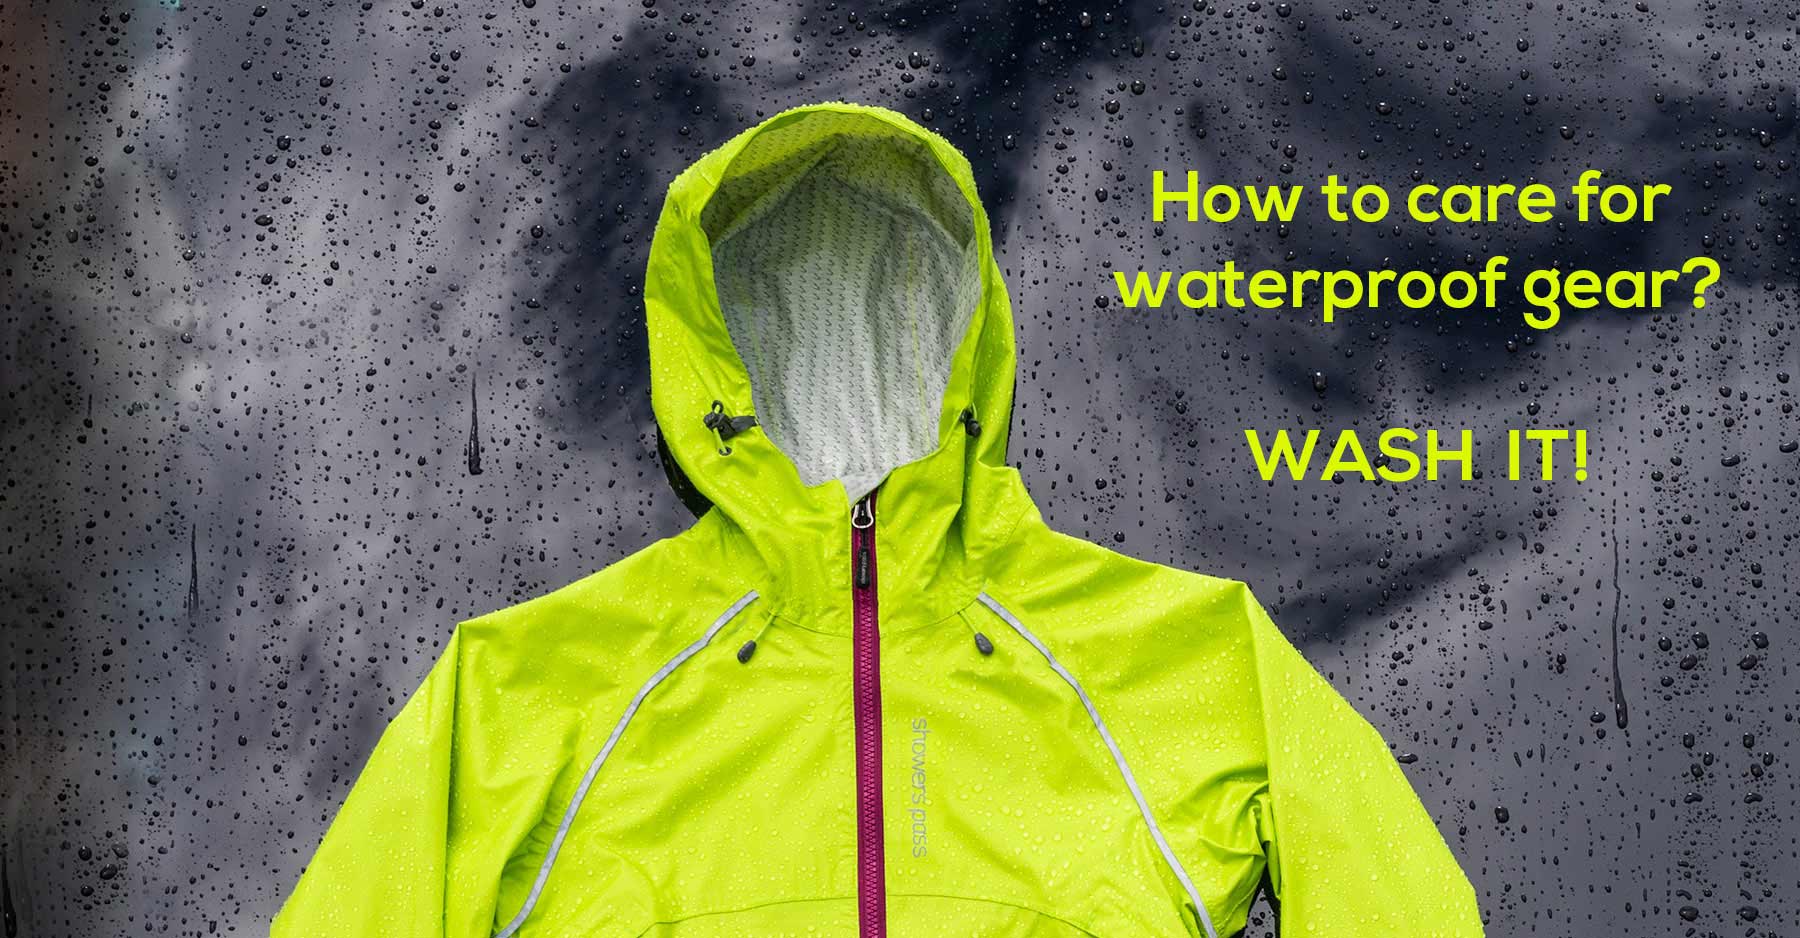 How to care for a waterproof jacket? Wash it!